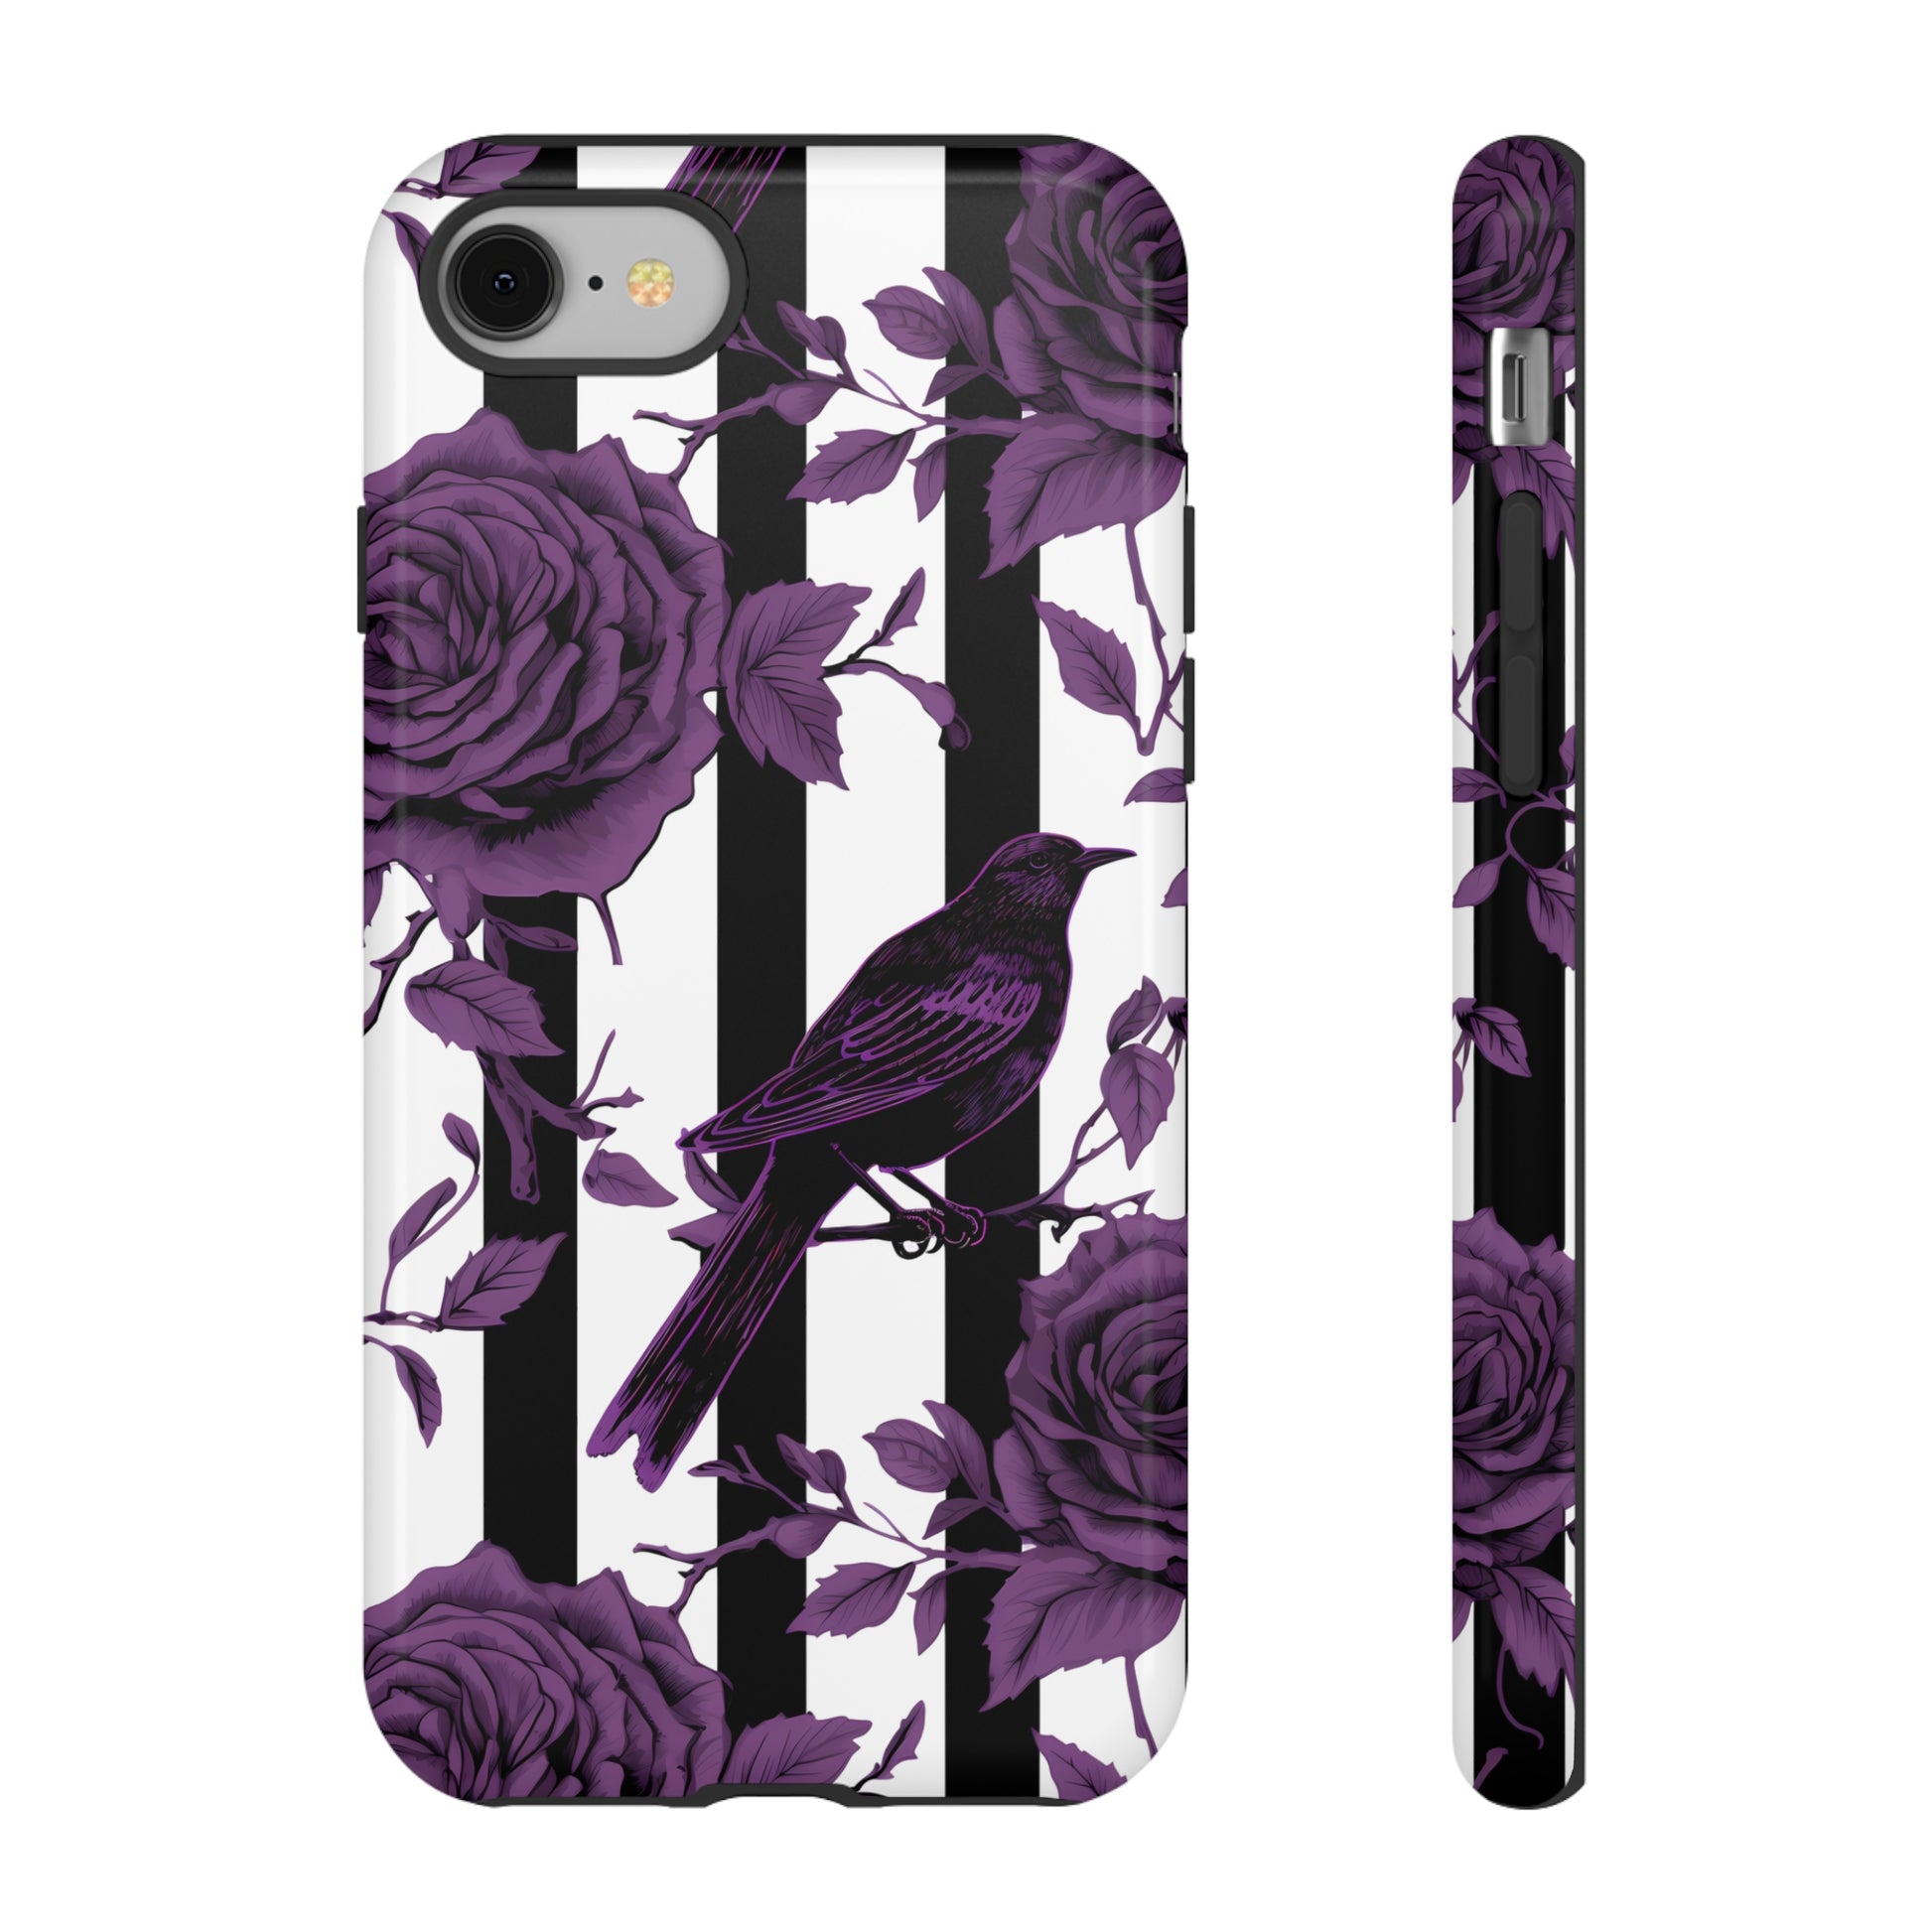 Striped Crows and Roses Tough Cases for iPhone Samsung Google PhonesPhone CaseVTZdesignsiPhone 8GlossyAccessoriescrowsGlossy